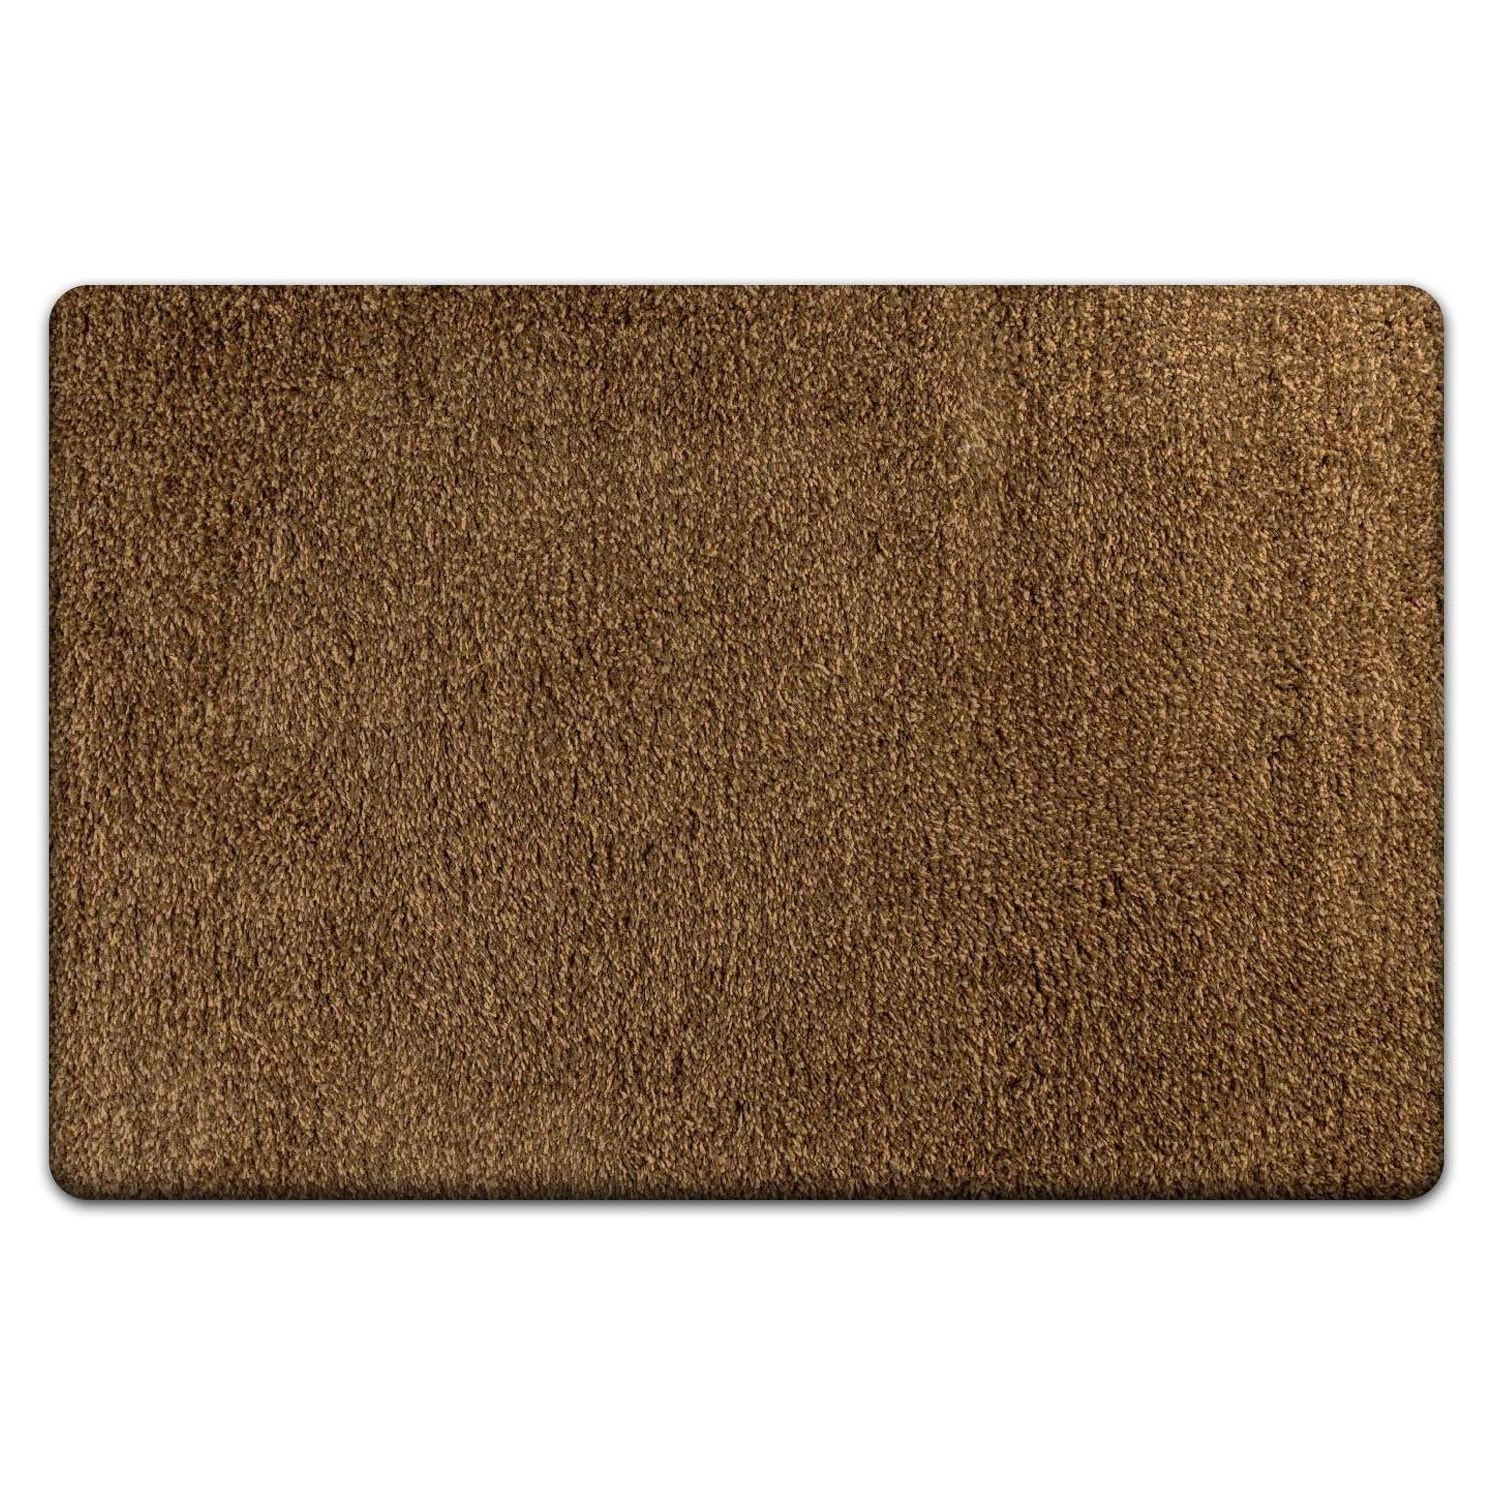 https://ak1.ostkcdn.com/images/products/is/images/direct/2dc2f991f83e1cd7de4097b74011da5b4229a20b/Door-Mat%2C-Entry-Rug%2C-Super-Absorbent%2C-20-X-30.jpg